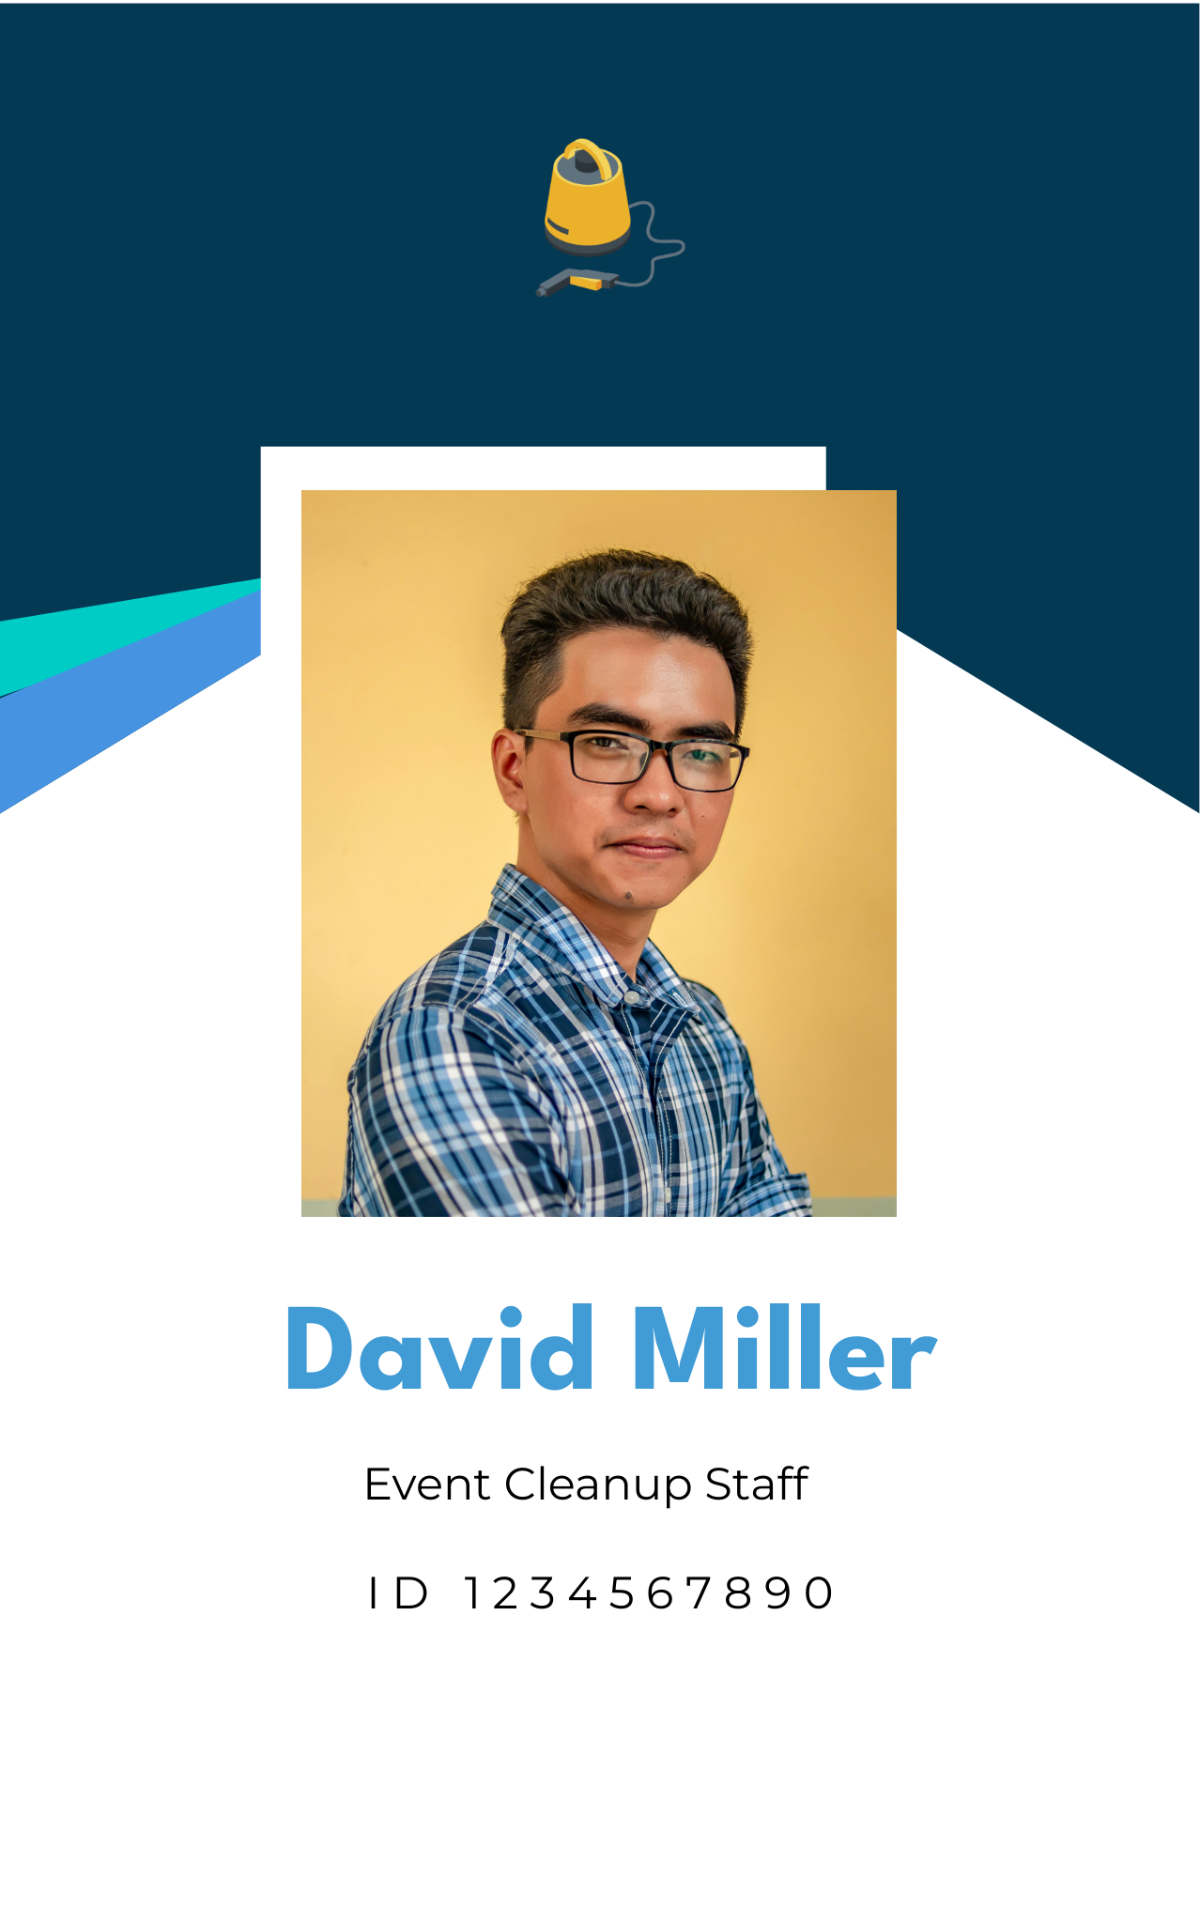 Event Cleanup Staff ID Card